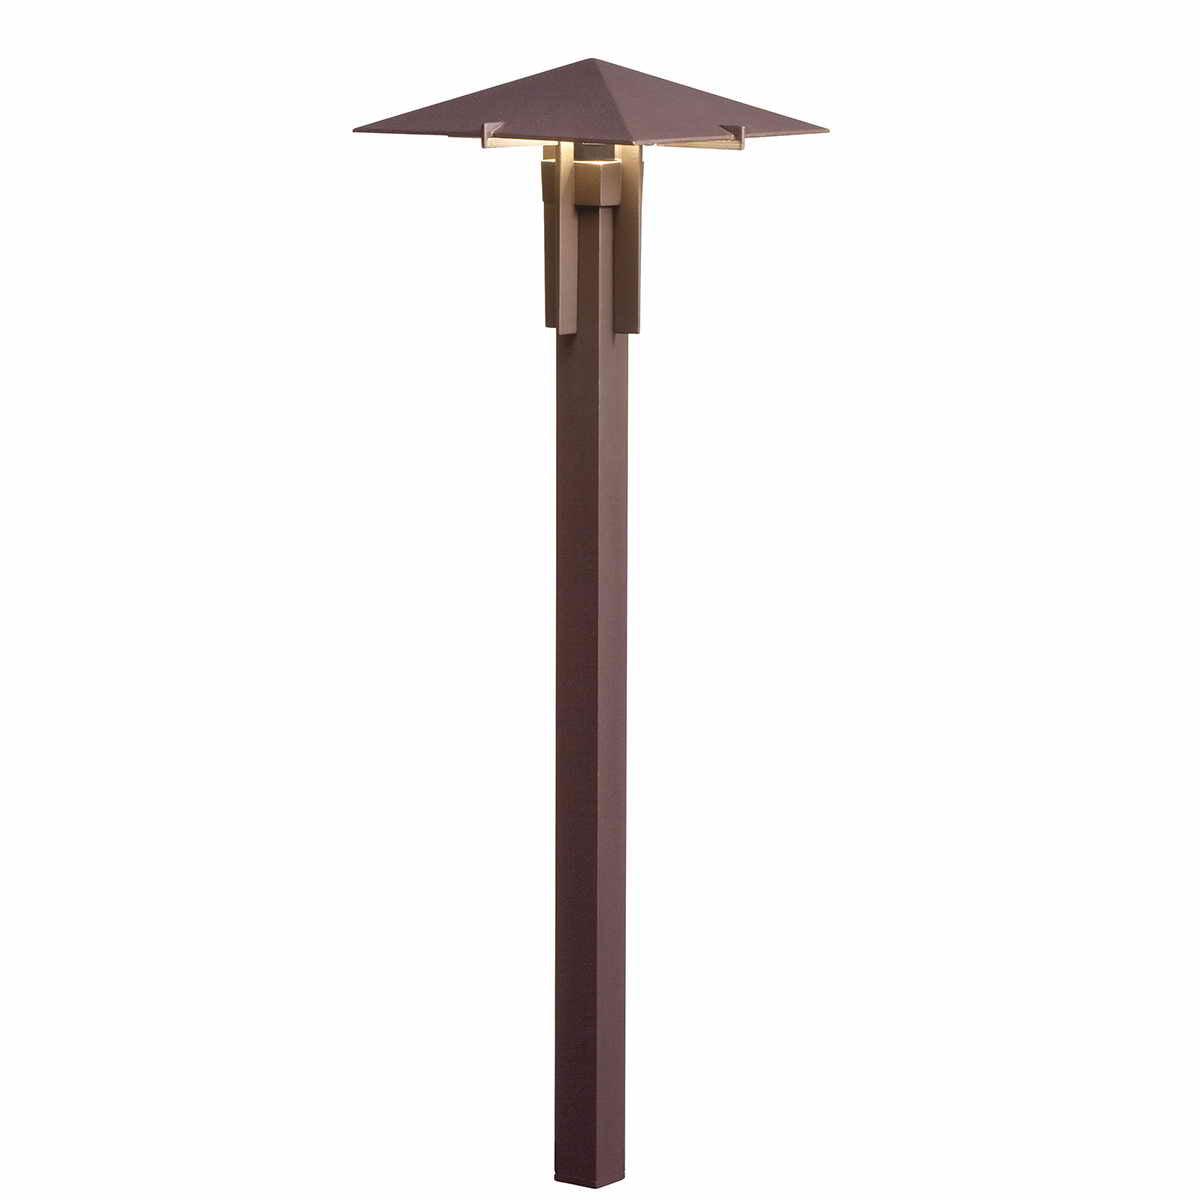 2W 160 Lumens LED Forged Path Light Textured Architectural Bronze